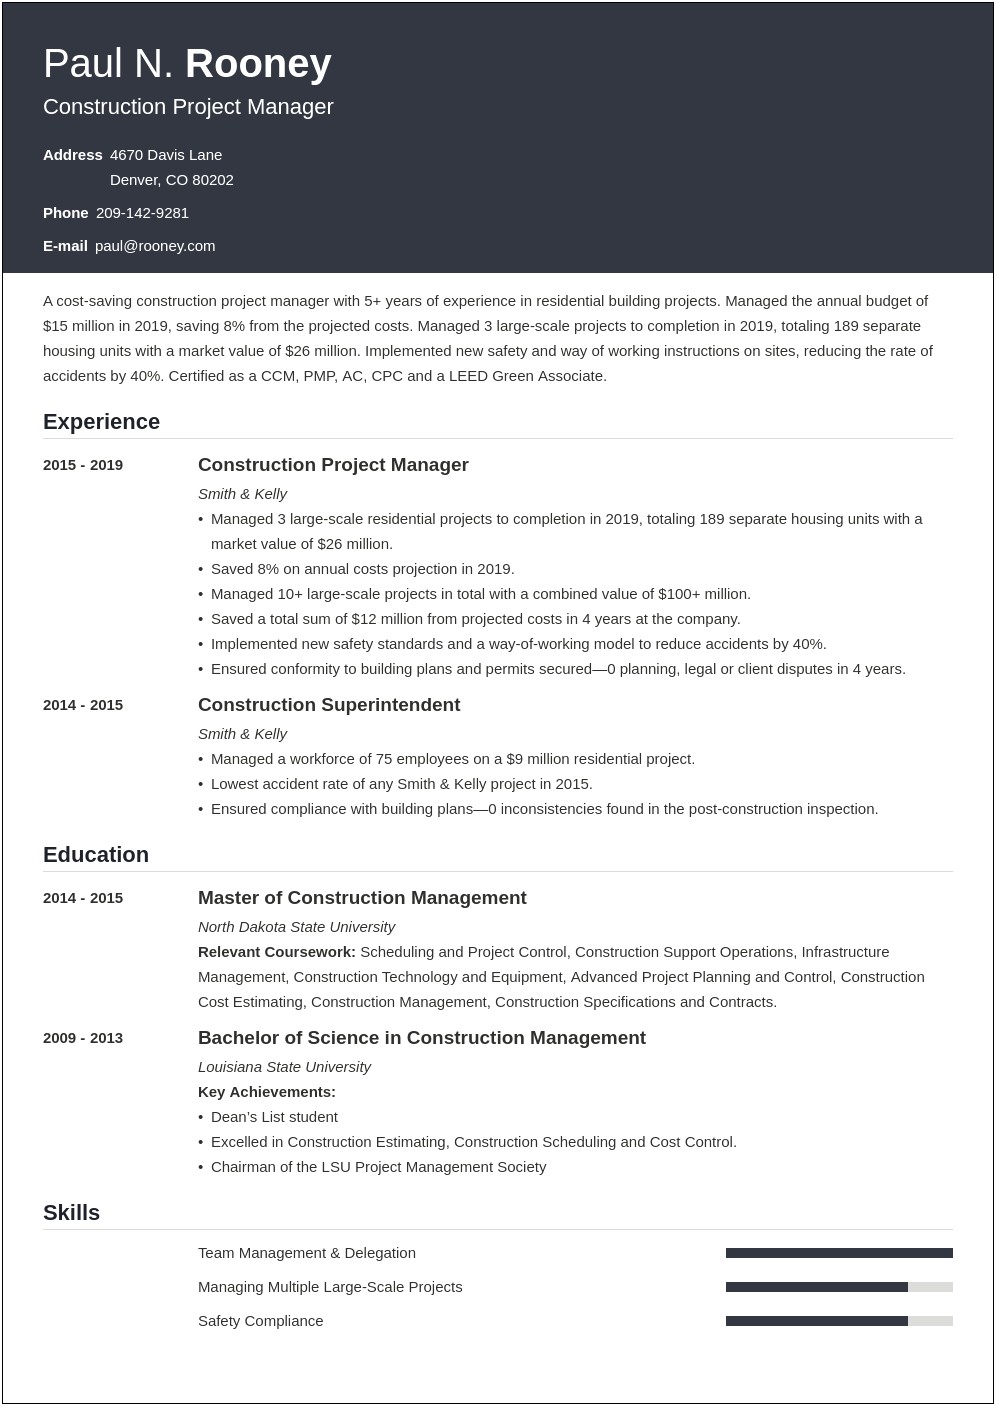 Low Voltage Project Manager Resume Sample